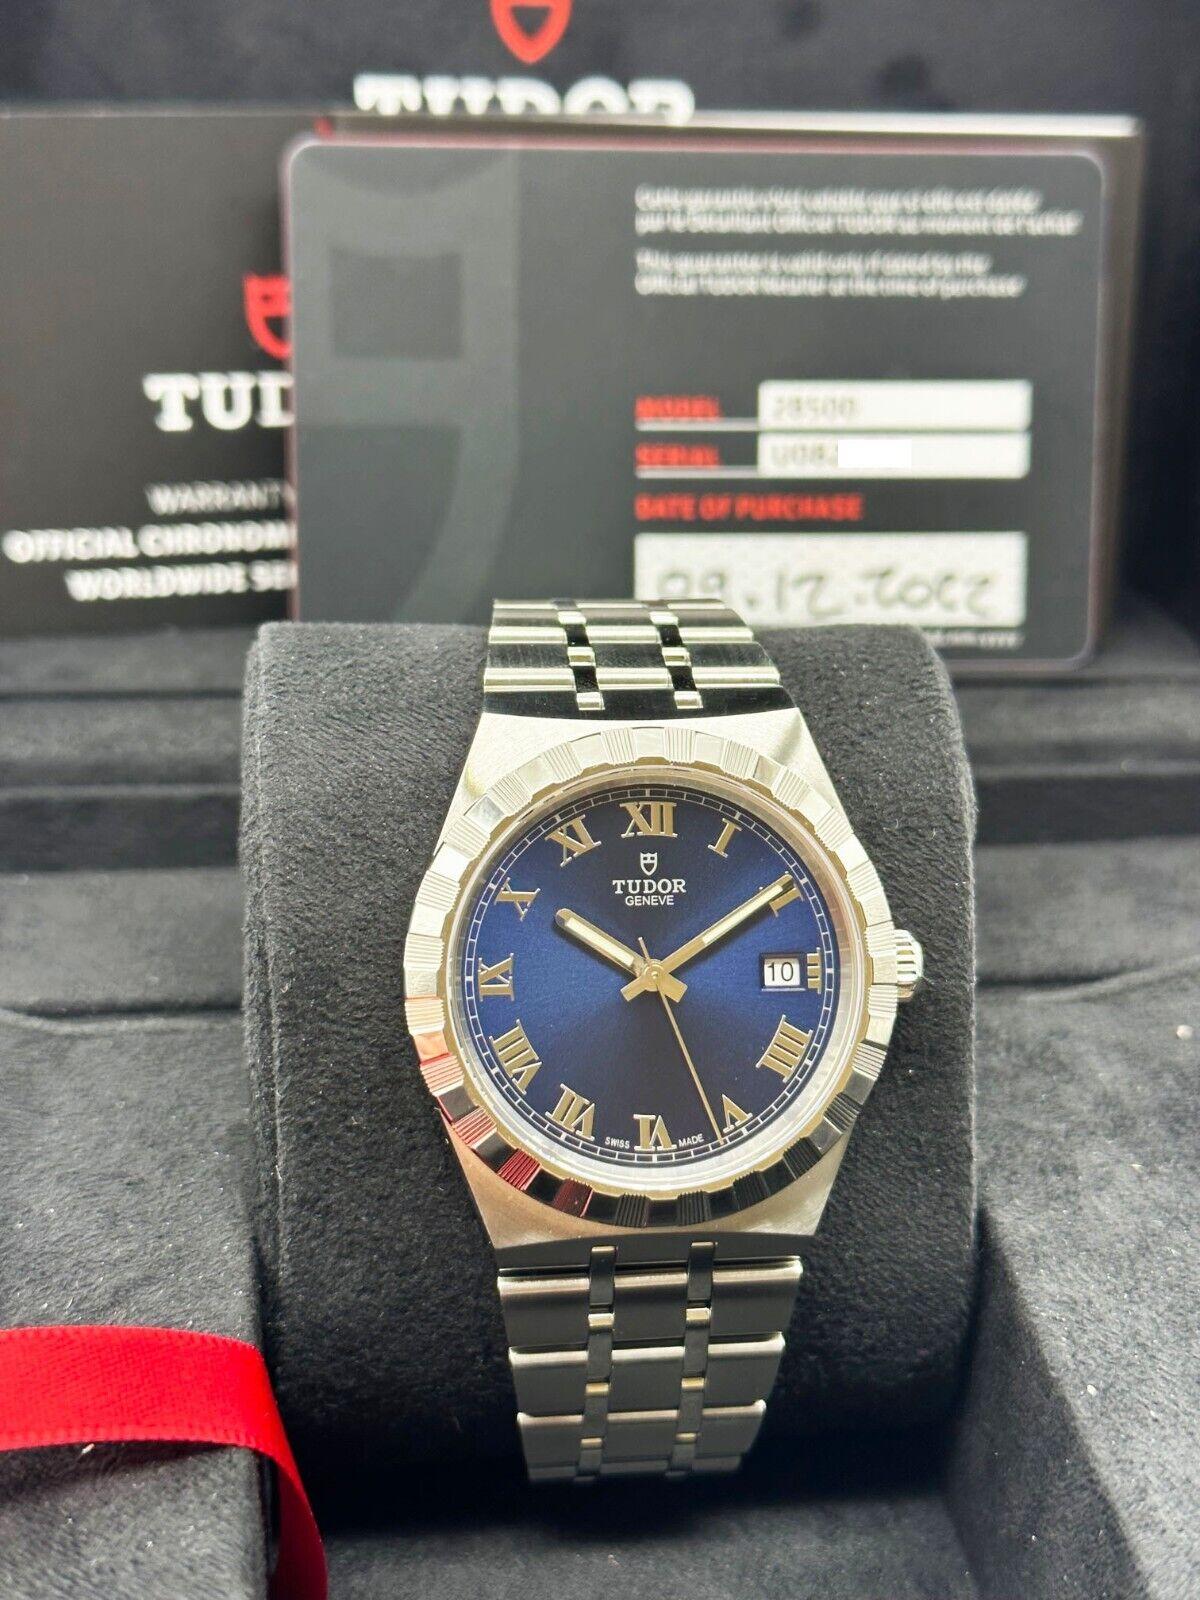 Style Number: 28500

Year: 2022

Model: Royal 

Case Material: Stainless Steel 

Band: Stainless Steel 

Bezel: Stainless Steel 

Dial: Blue

Face: Sapphire Crystal 

Case Size: 38mm 

Includes: 

-Tudor Box & Paper

-Certified Appraisal 

-5 Year